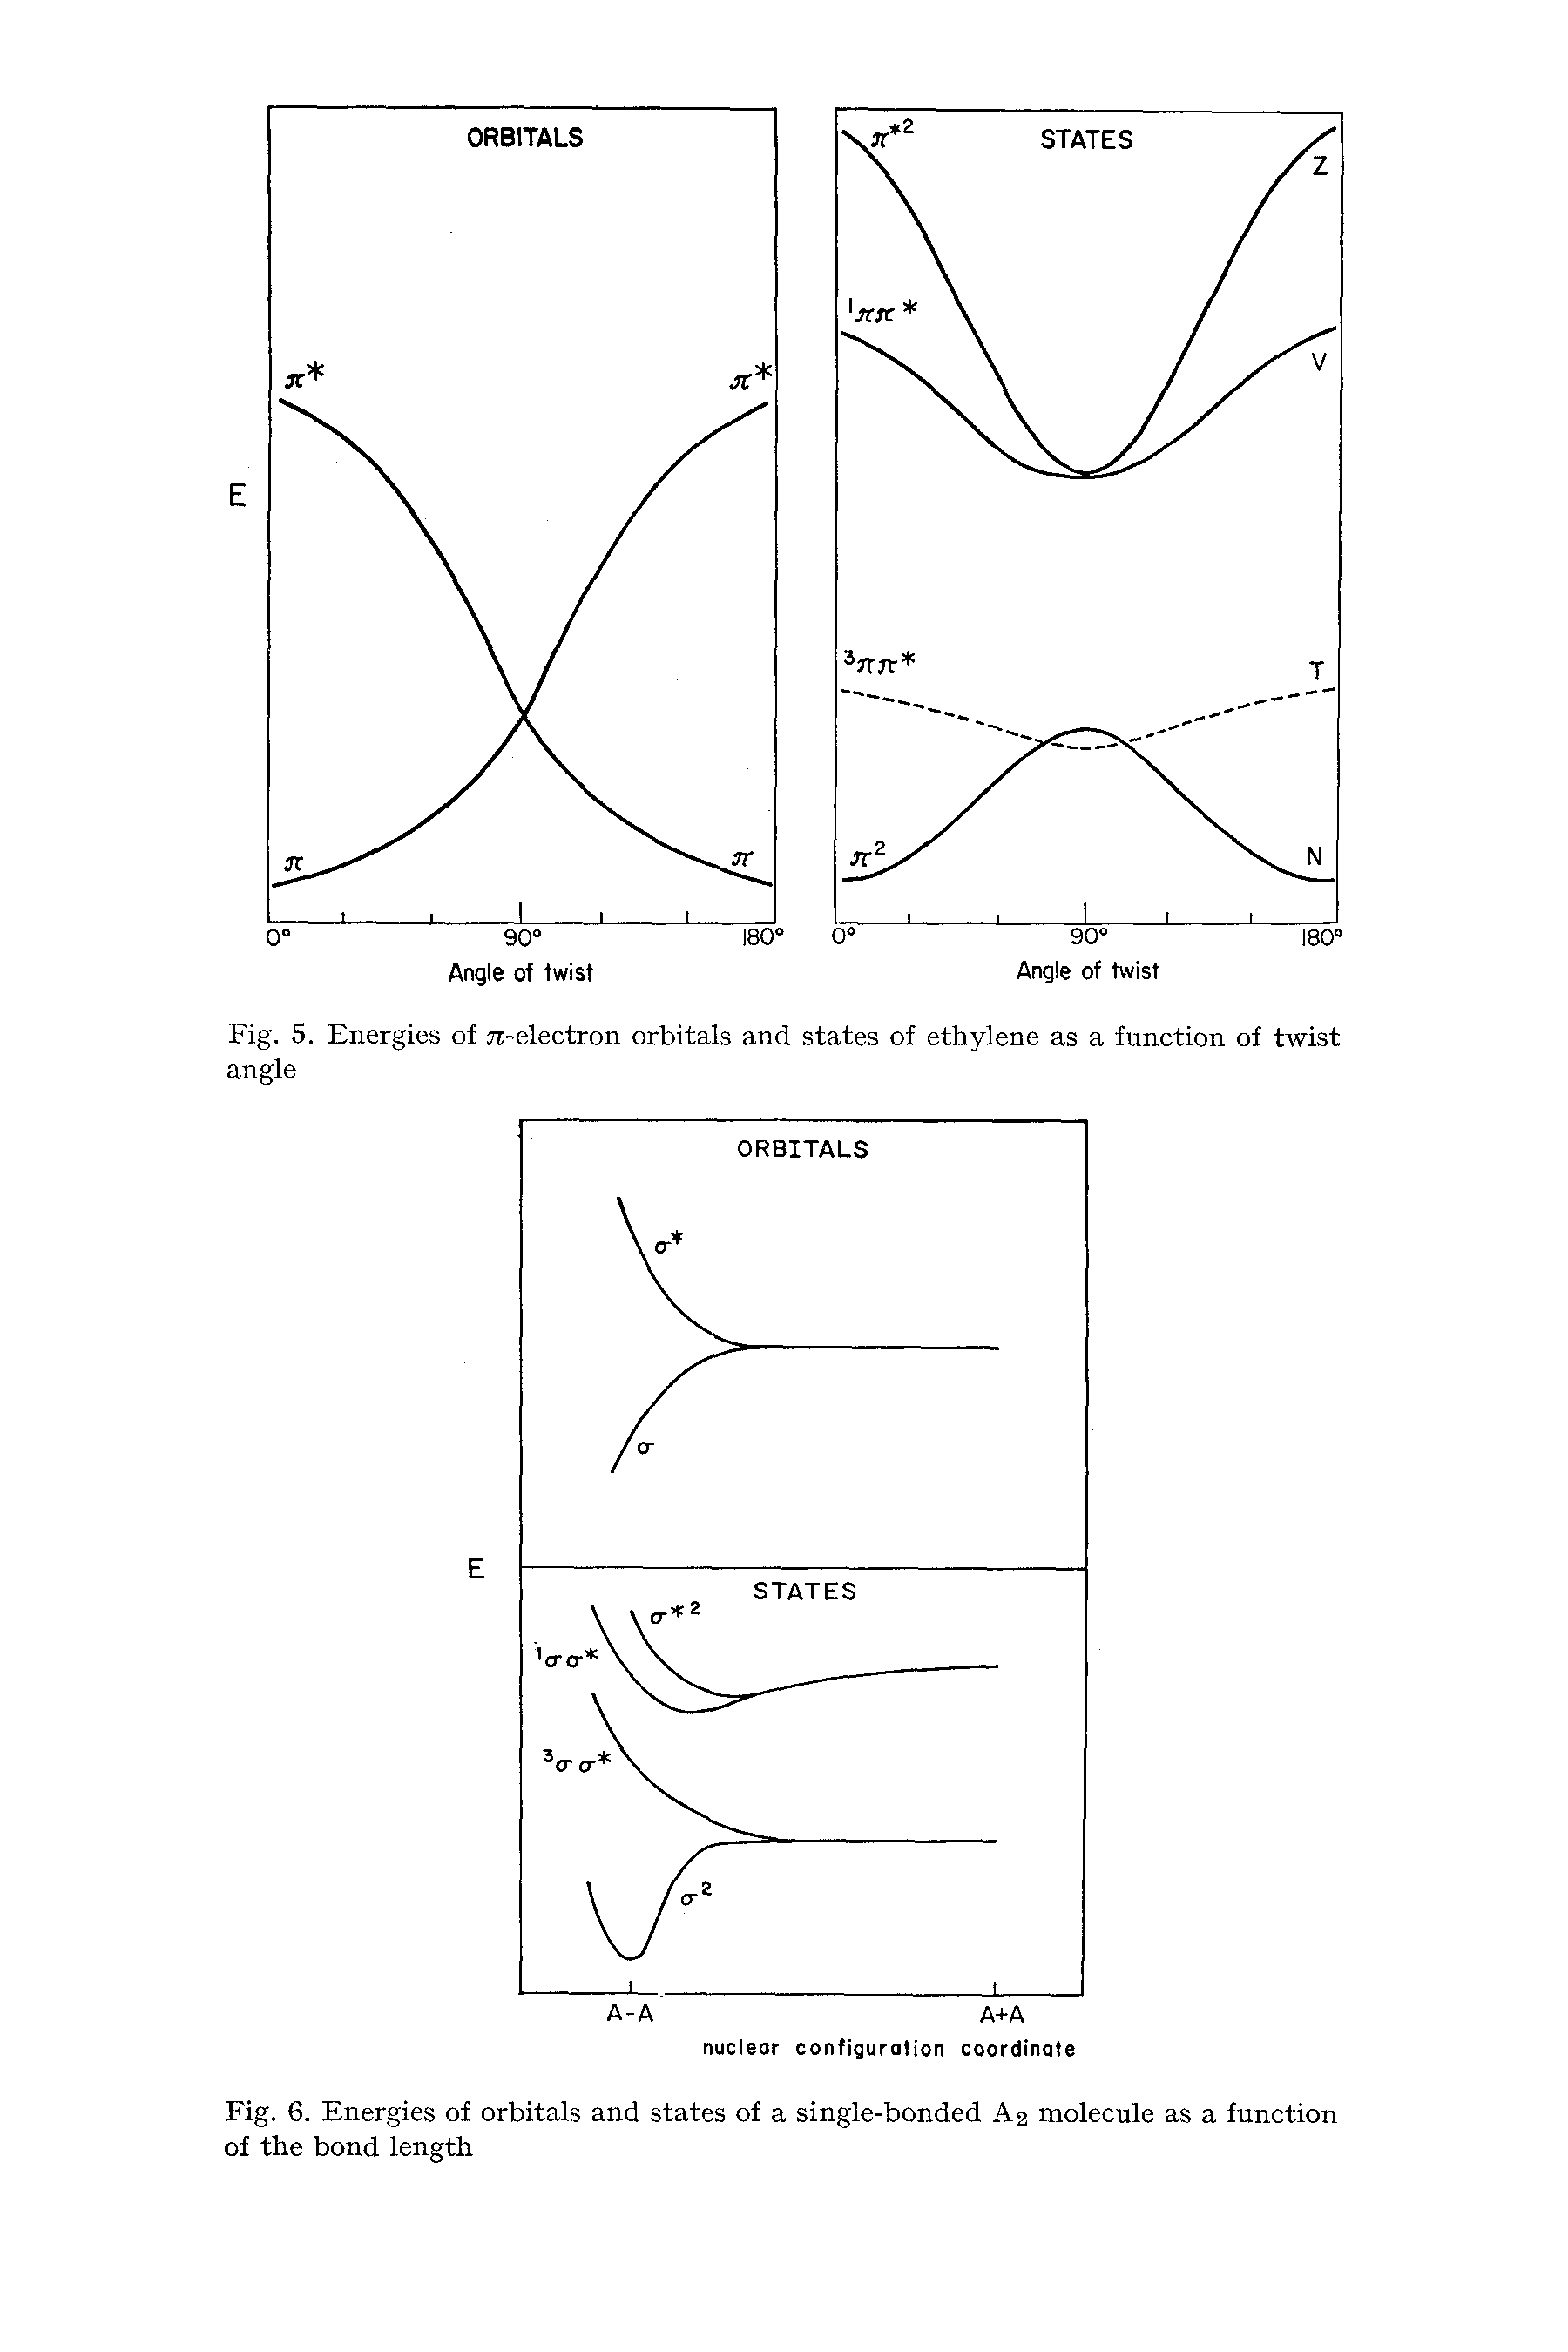 Fig. 6. Energies of orbitals and states of a single-bonded A2 molecule as a function of the bond length...